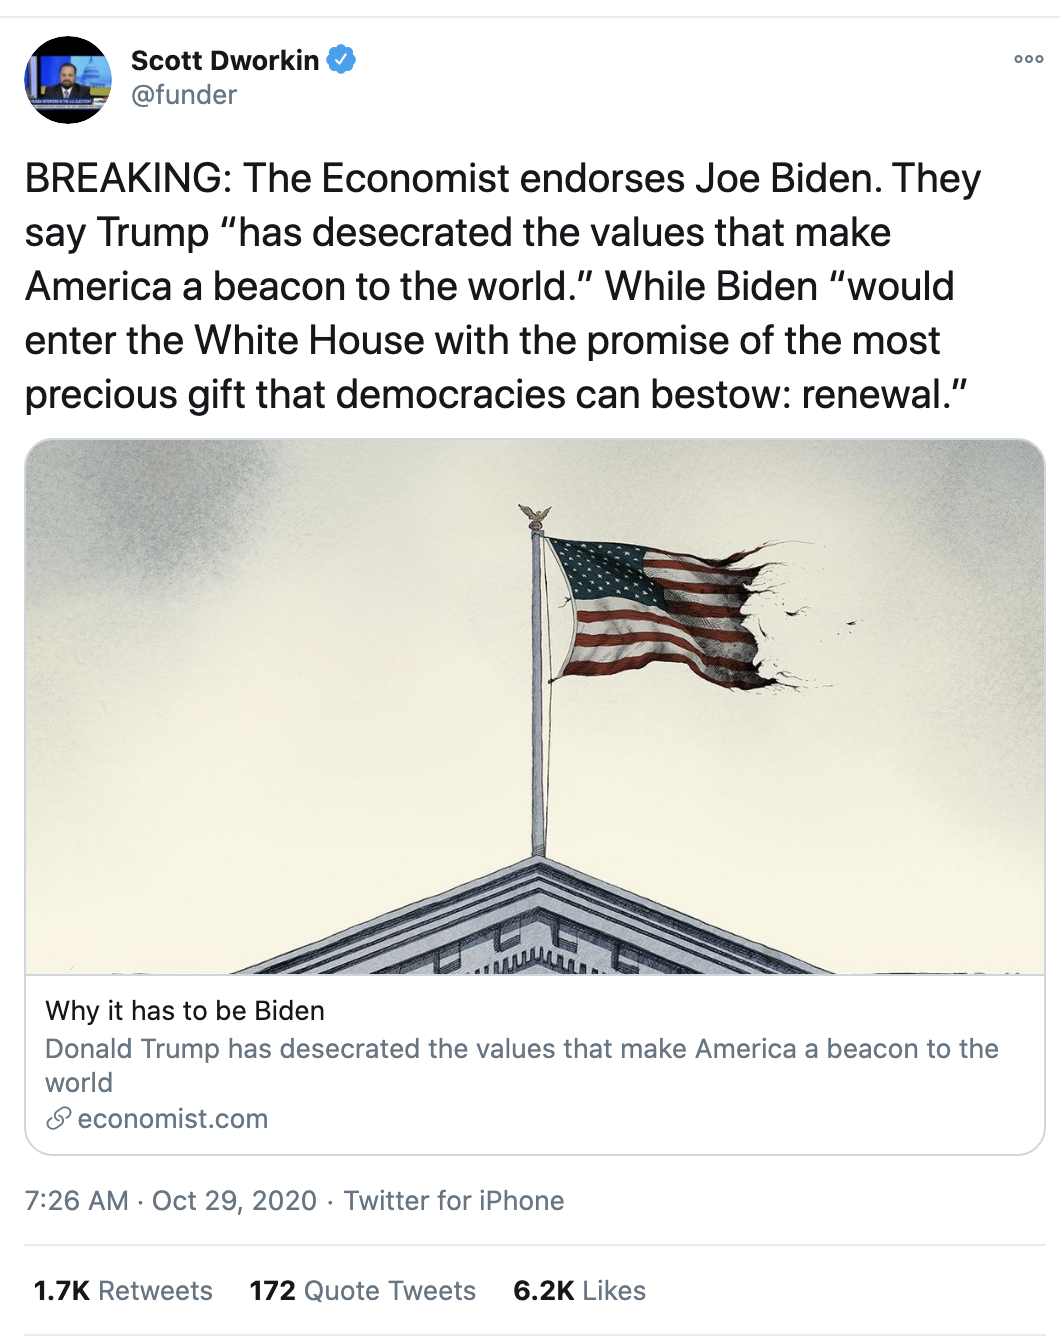 Screen-Shot-2020-10-29-at-8.38.04-AM 'The Economist' Makes Election-Influencing 2020 Endorsement Economy Featured Natural Disaster Politics Top Stories 